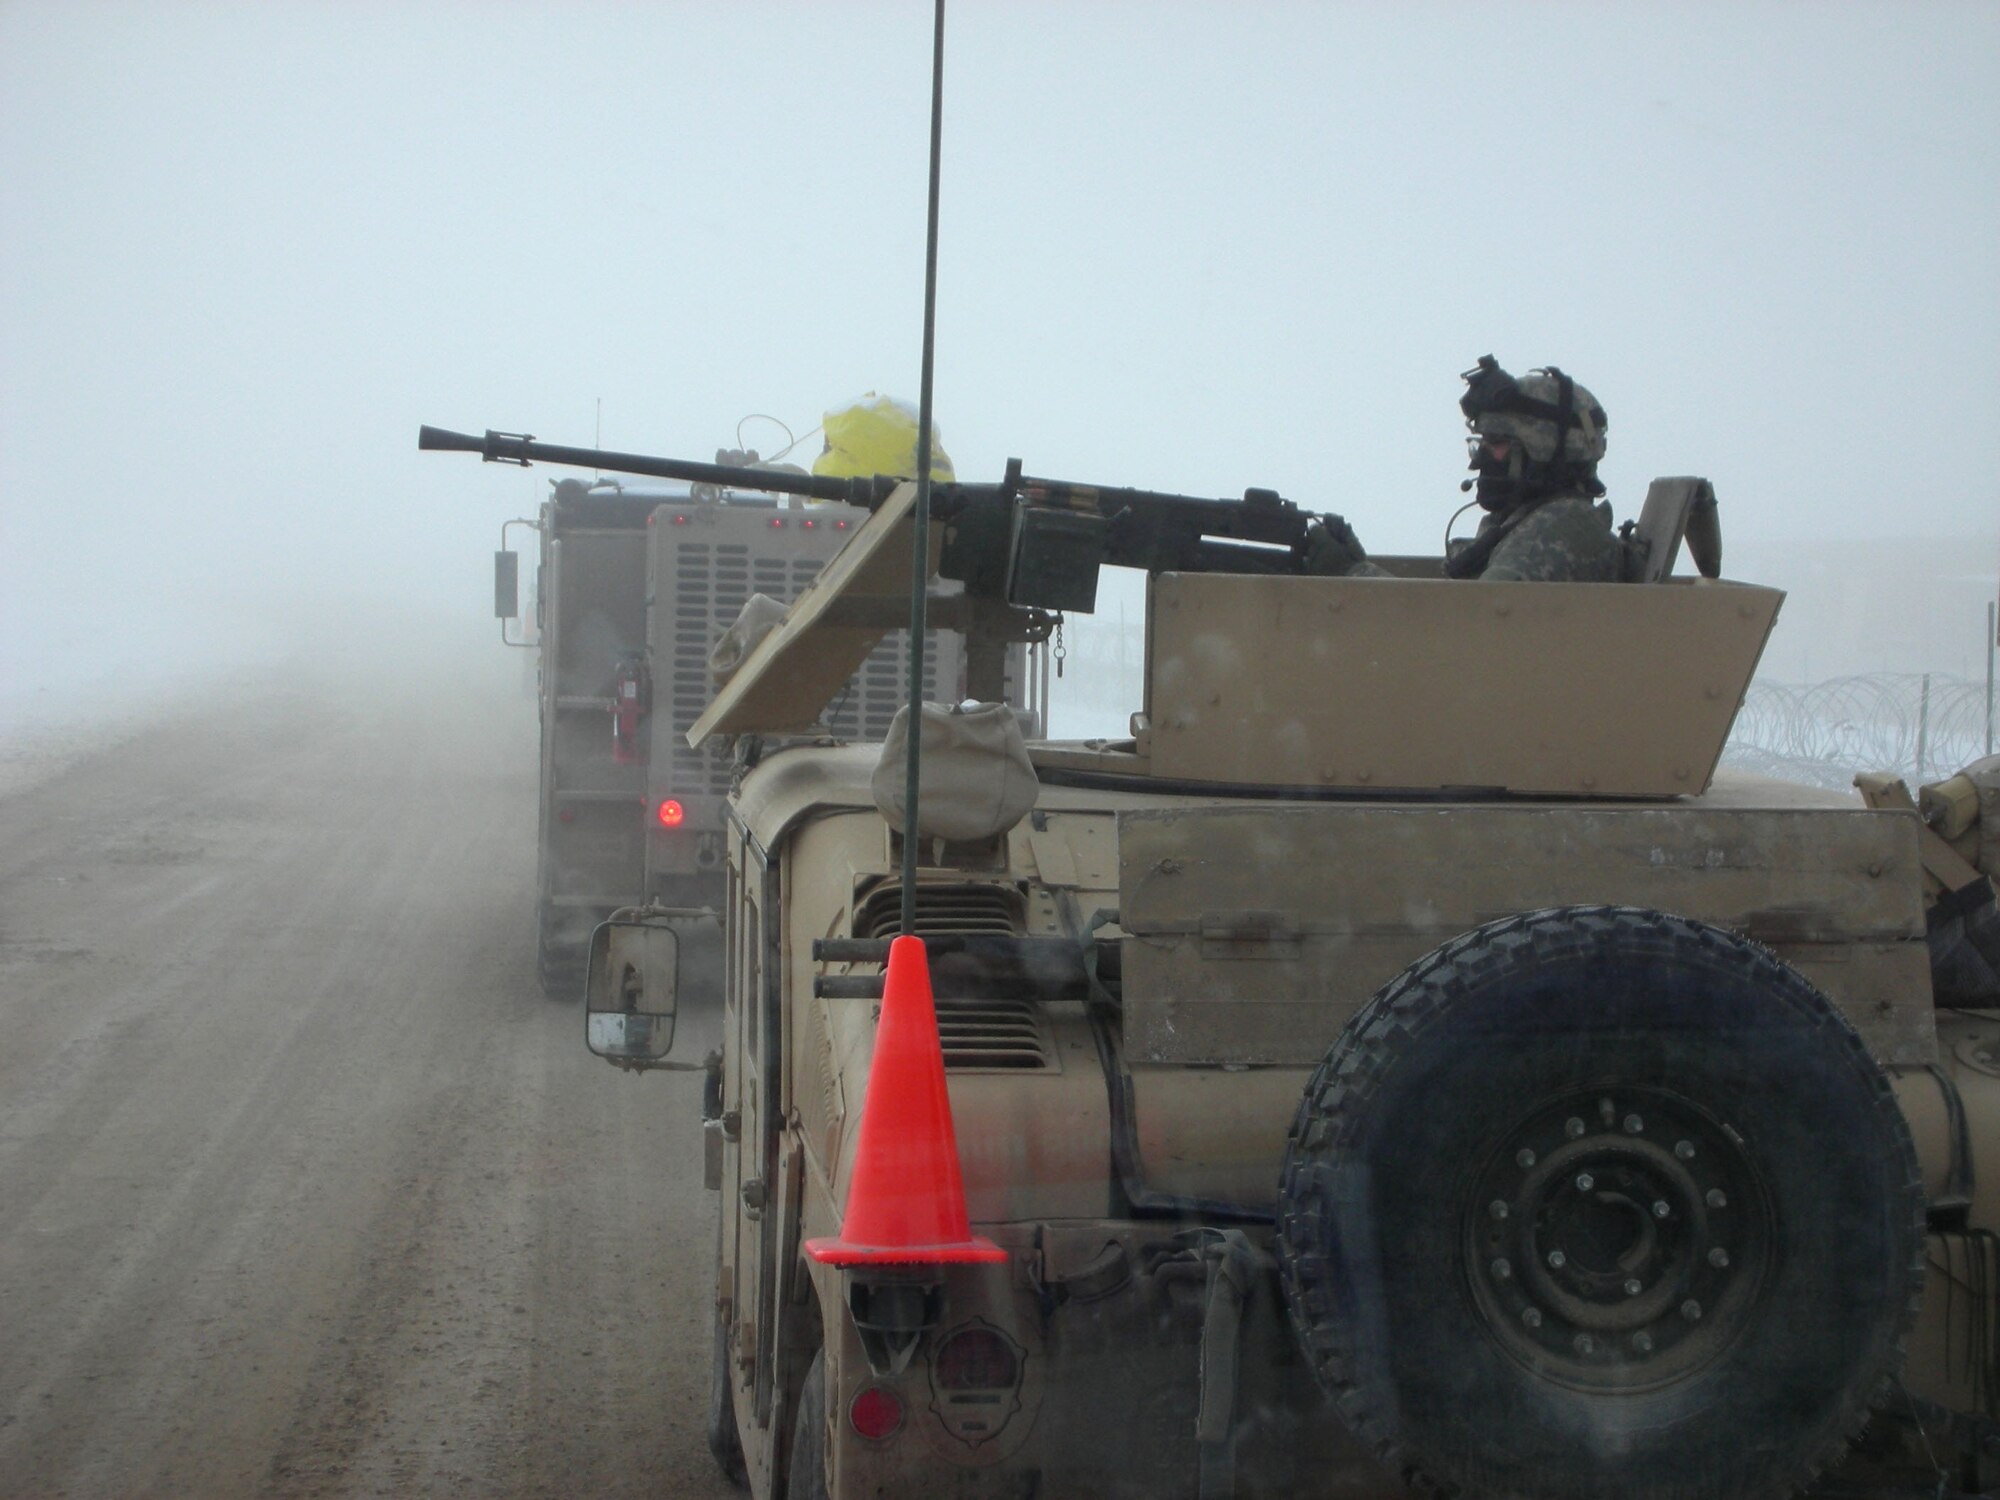 An Army Humvee turret gunner guards a P-19 airport rescue firefighting vehicle operated by the 379th Expeditionary Civil Engineer Squadron Fire and Emergency Services Flex Team during an operation in Southwest Asia. Flex Team deploys at a moment's notice to forward-operating bases to provide aircraft rescue, emergency medical and firefighting support whenever and wherever needed. (U.S. Air Force photo)
